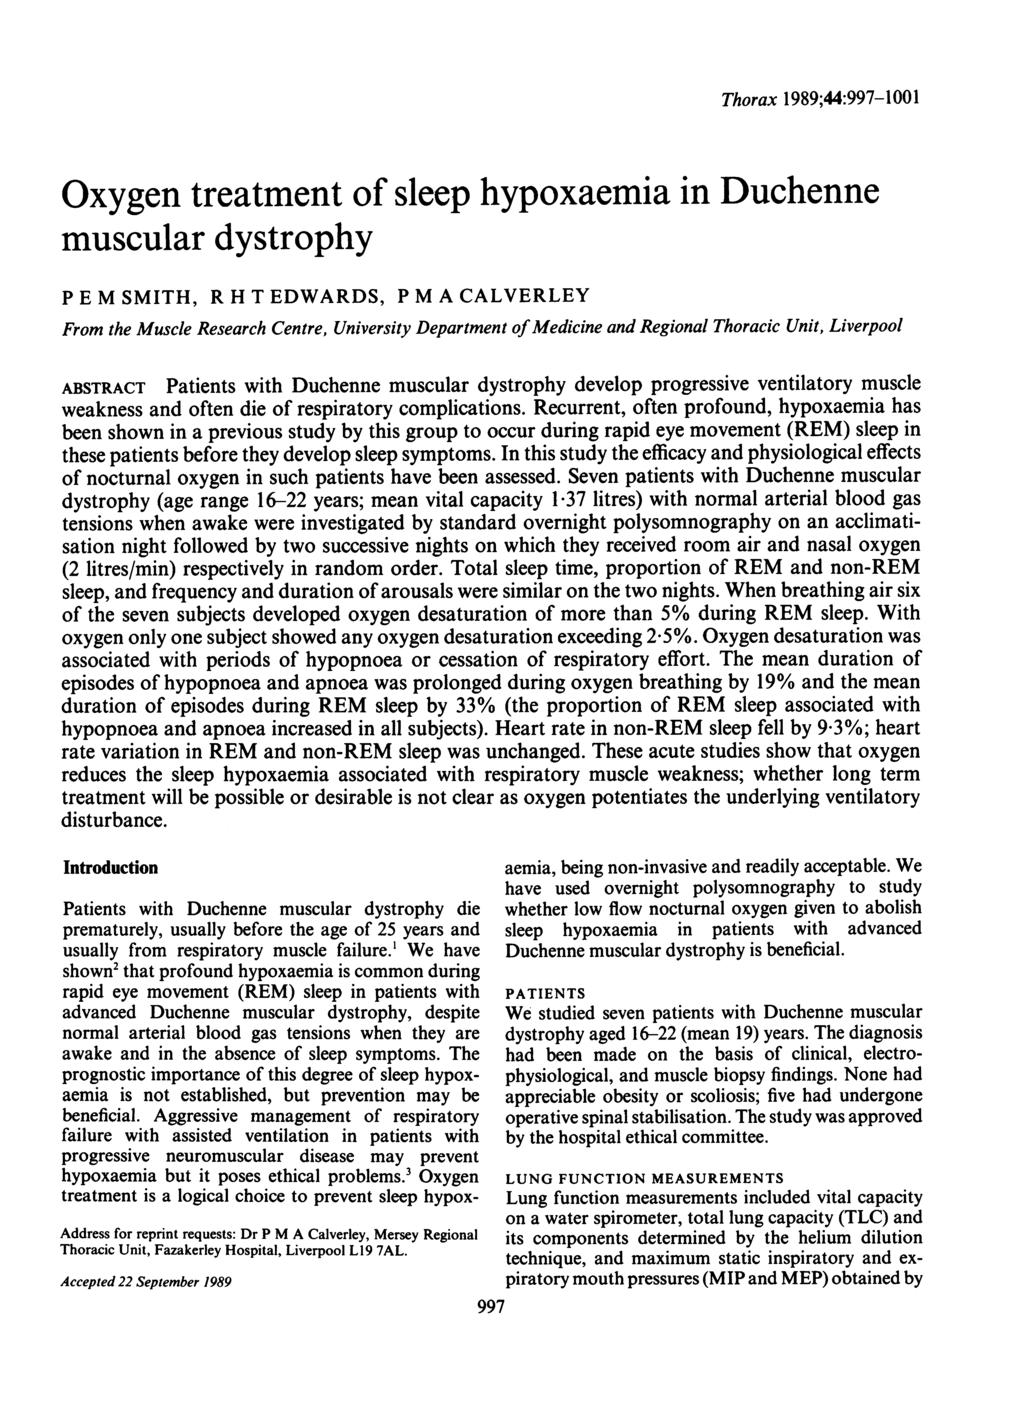 Thorax 1989;44:997-1001 Oxygen treatment of sleep hypoxaemia in Duchenne muscular dystrophy P E M SMITH, R H T EDWARDS, P M A CALVERLEY From the Muscle Research Centre, University Department